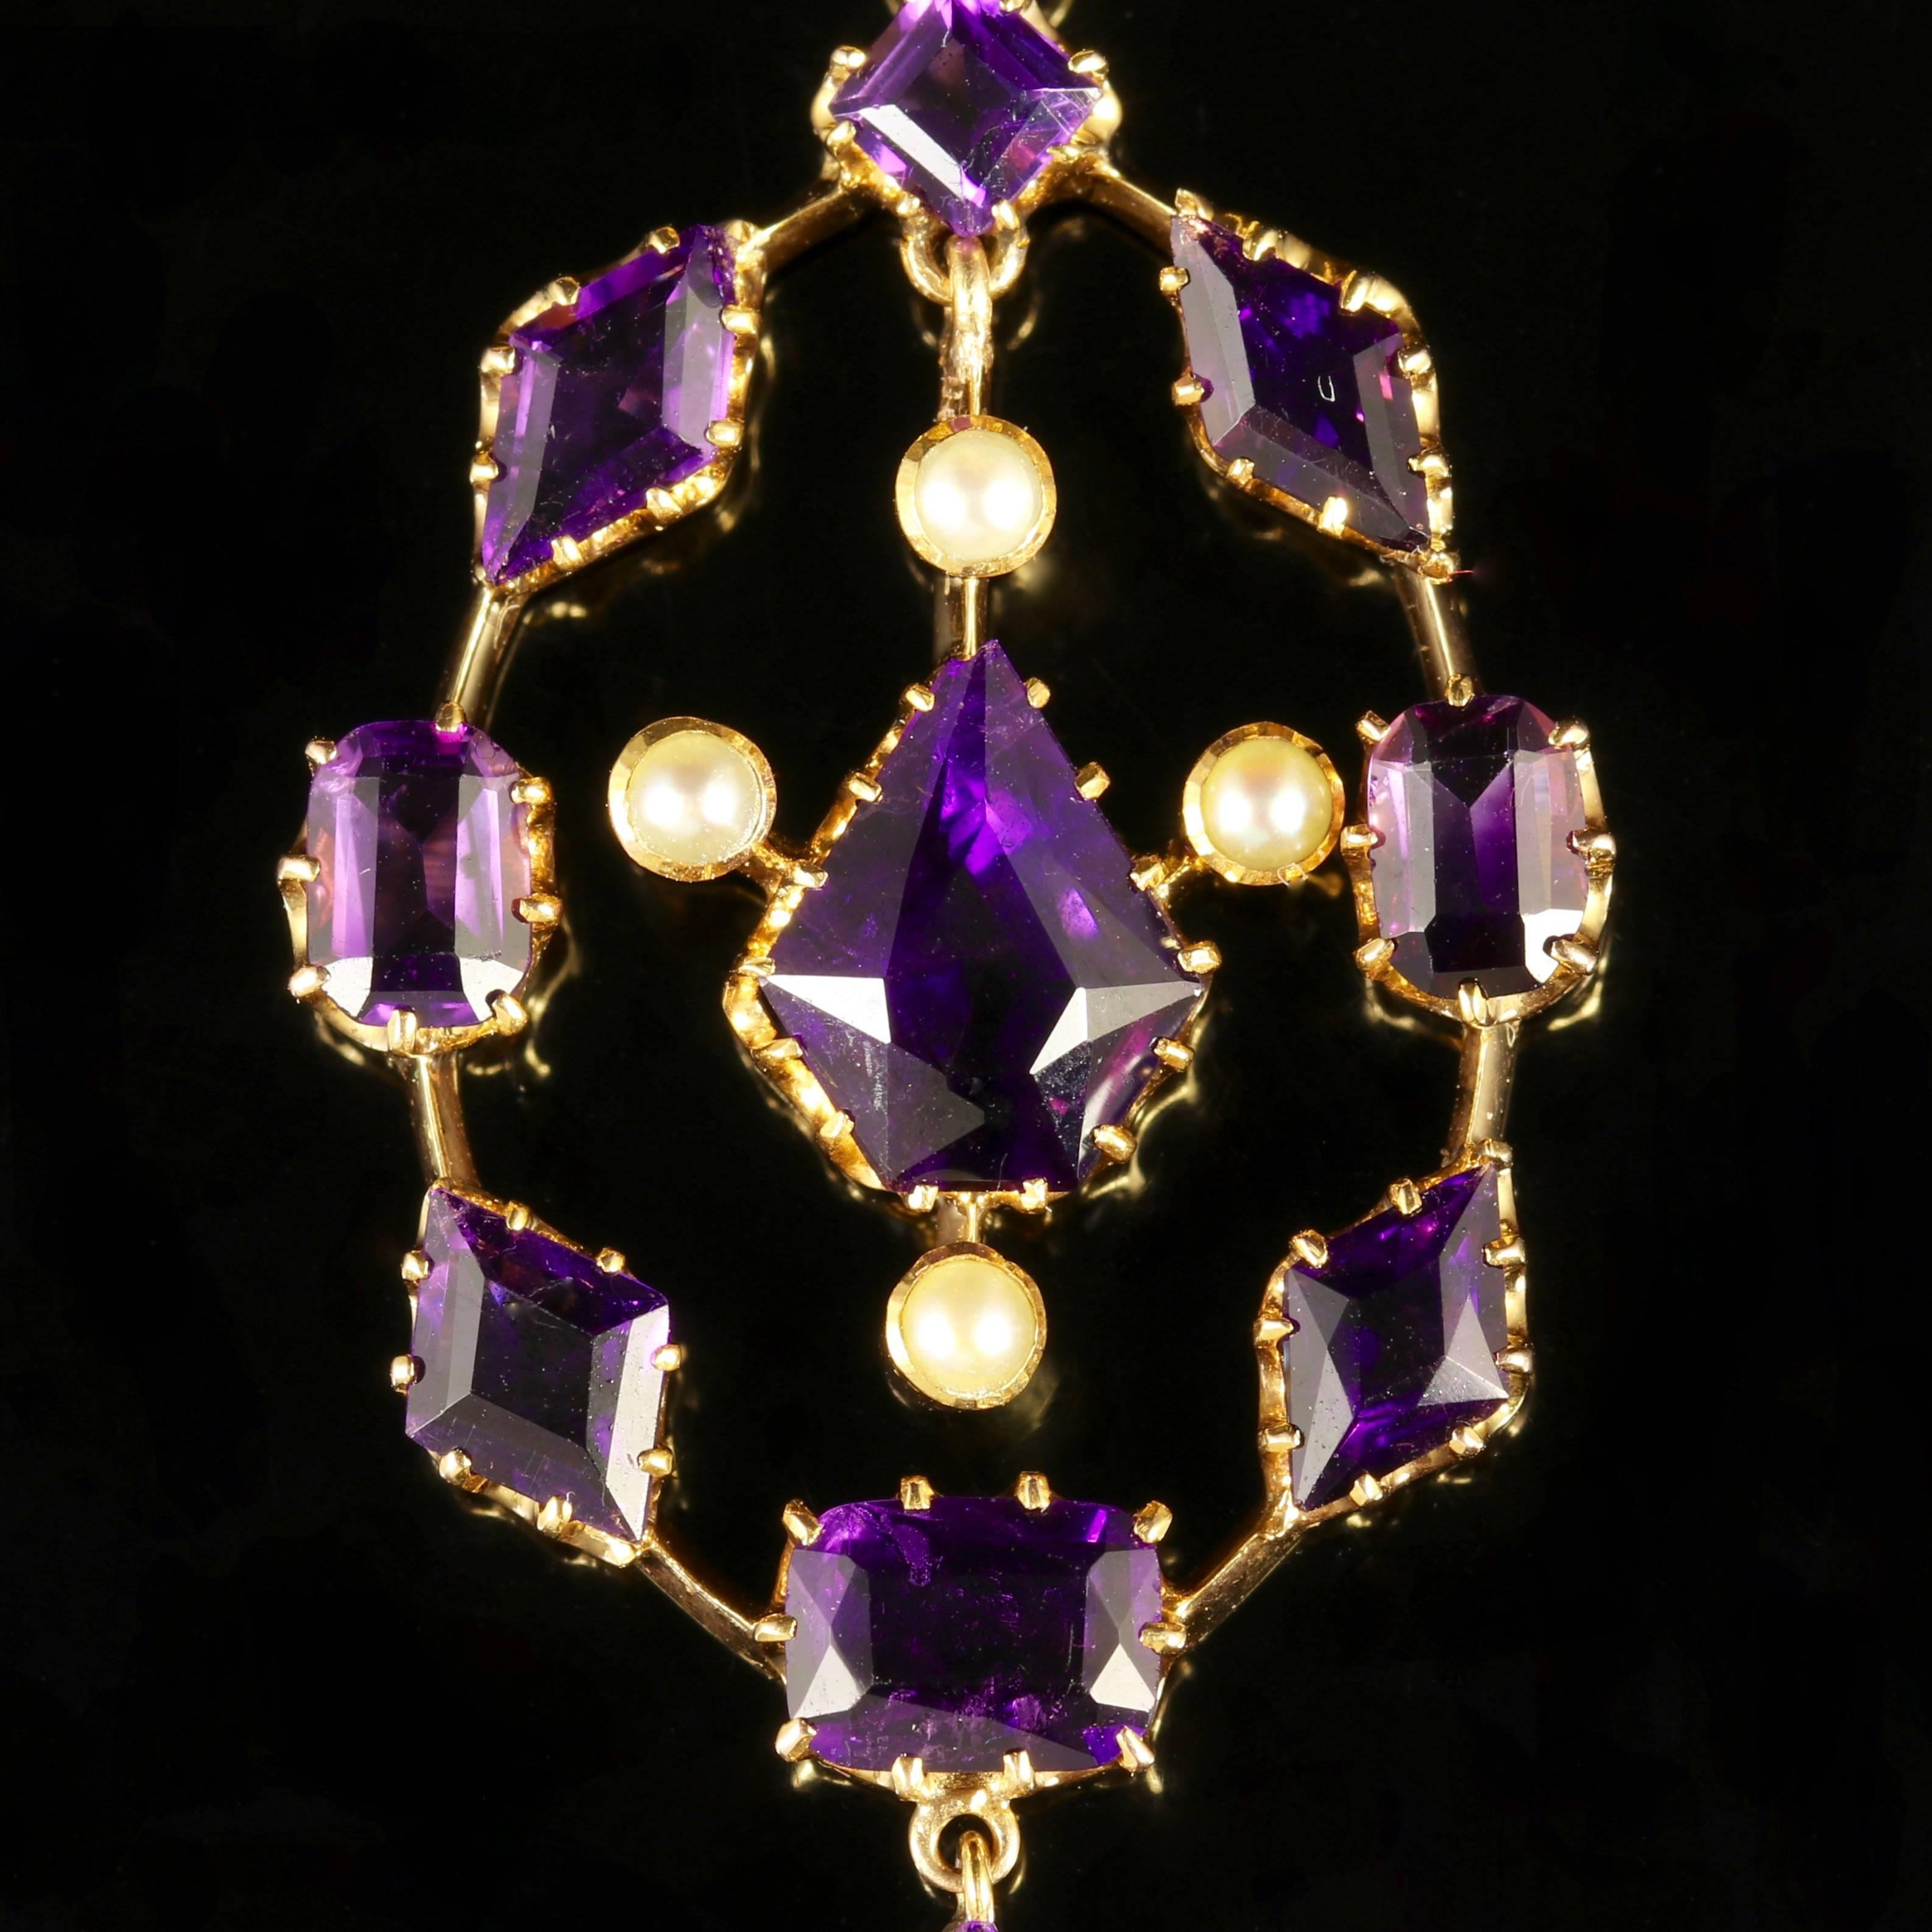 This fabulous antique Victorian 15ct Yellow Gold necklace is adorned with Amethysts and Pearls. 

All genuine Victorian, Circa 1880.

Stunning deep purple hand cut Amethysts are set into a 15ct Gold gallery with a central swinging pendulum.